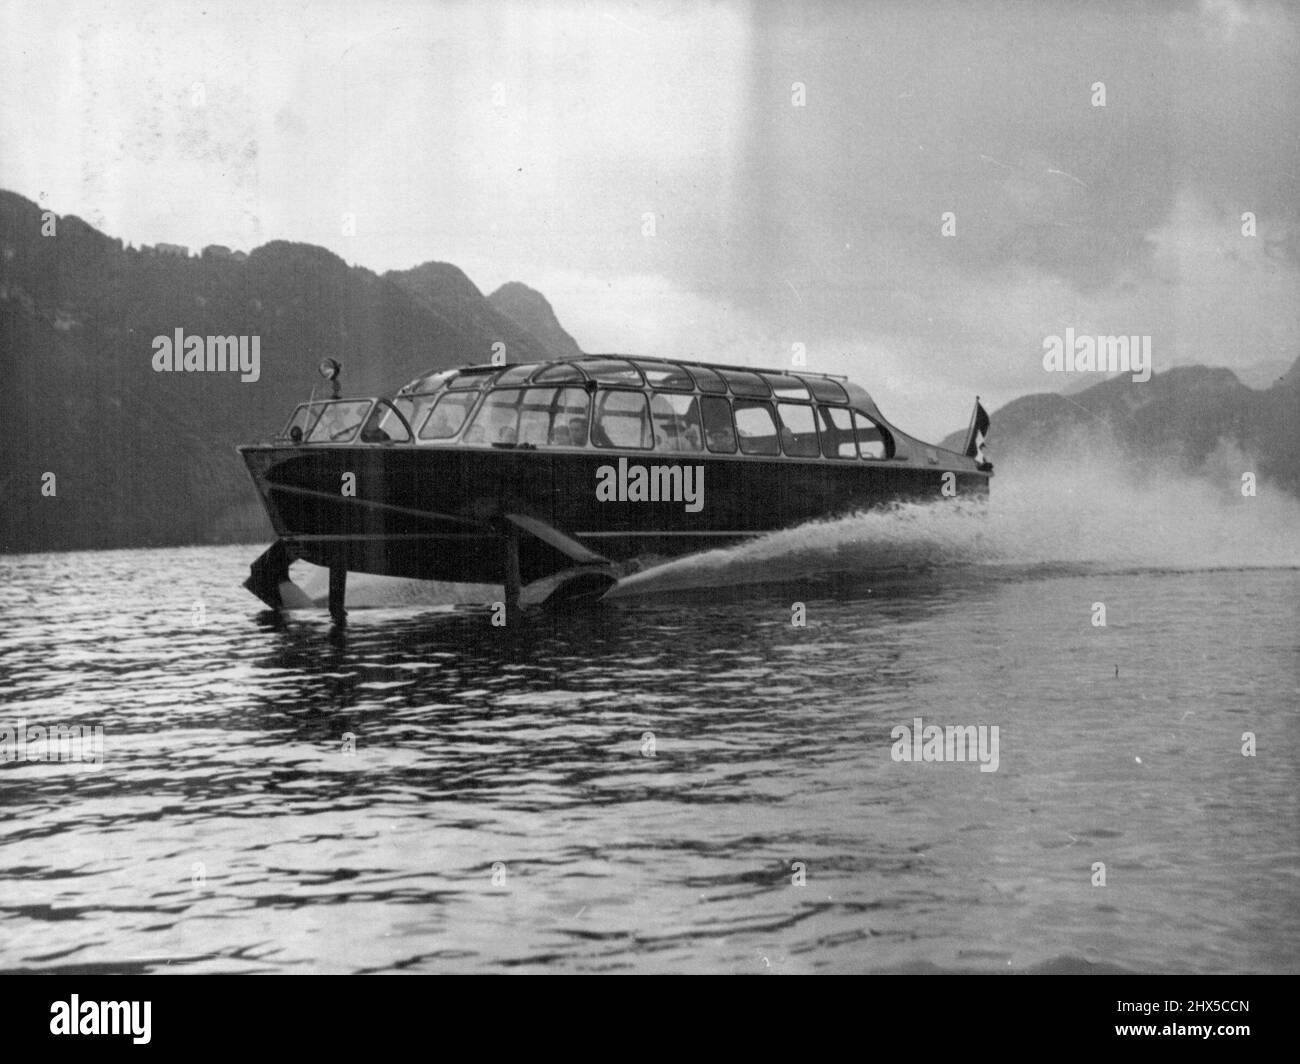 World' s Fastest Passenger Boat -- The Hydrofoil craft at speed during a demonstration run. Claimed by its inventor, Hans Von Schertel of Germany, to be the fastest passenger-carrying boat in the world, a 45-foot-long boat with wings was put through its paces on lake Lucerne, Switzerland, September 9. It covered 50 miles up and down the lake at 50 miles an hour with 32 passengers aboard. The Hydraulically-operated 'Wings' lifted the main part of the craft out of the water shortly after it started, decreasing the water-drag by some 50%. The craft is powered by a 350HP diesel engine driving a no Stock Photo